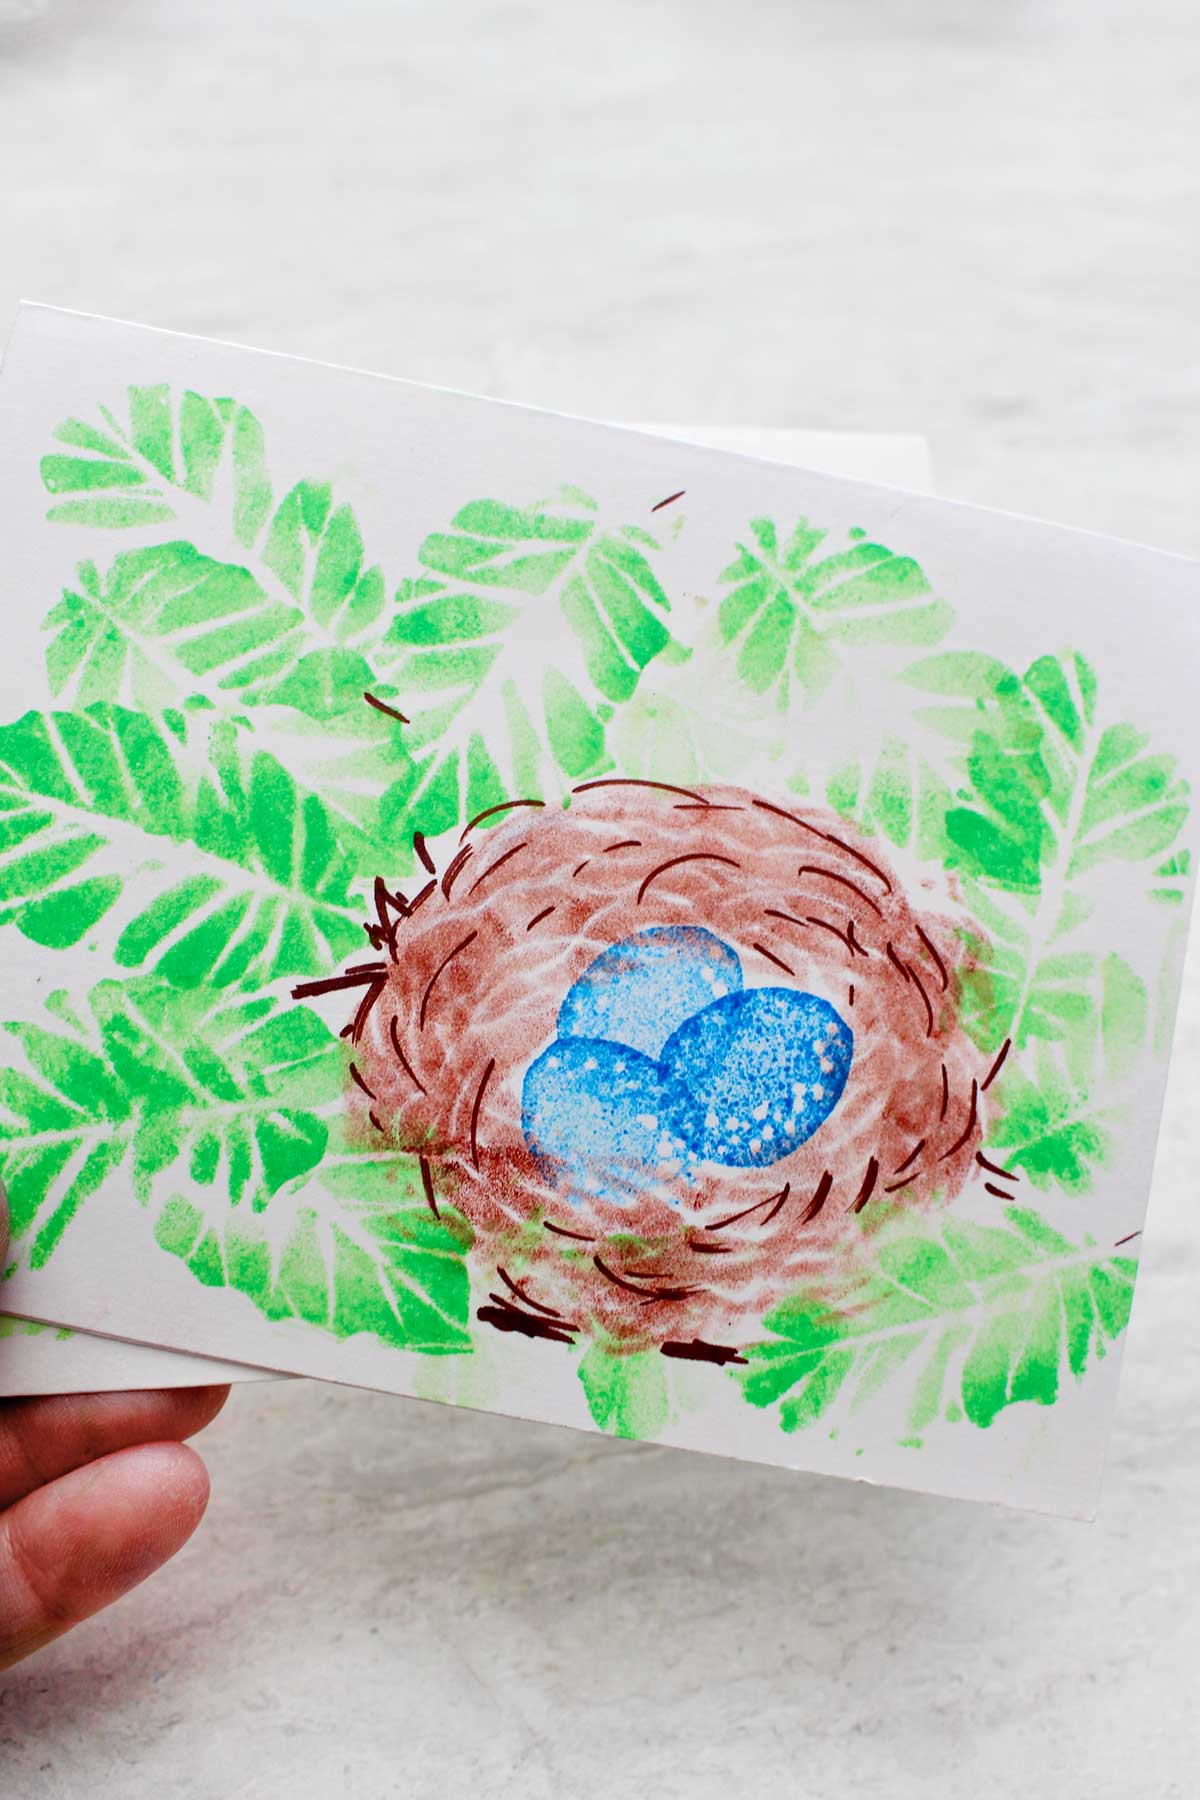 Print of leaves, a nest and eggs.